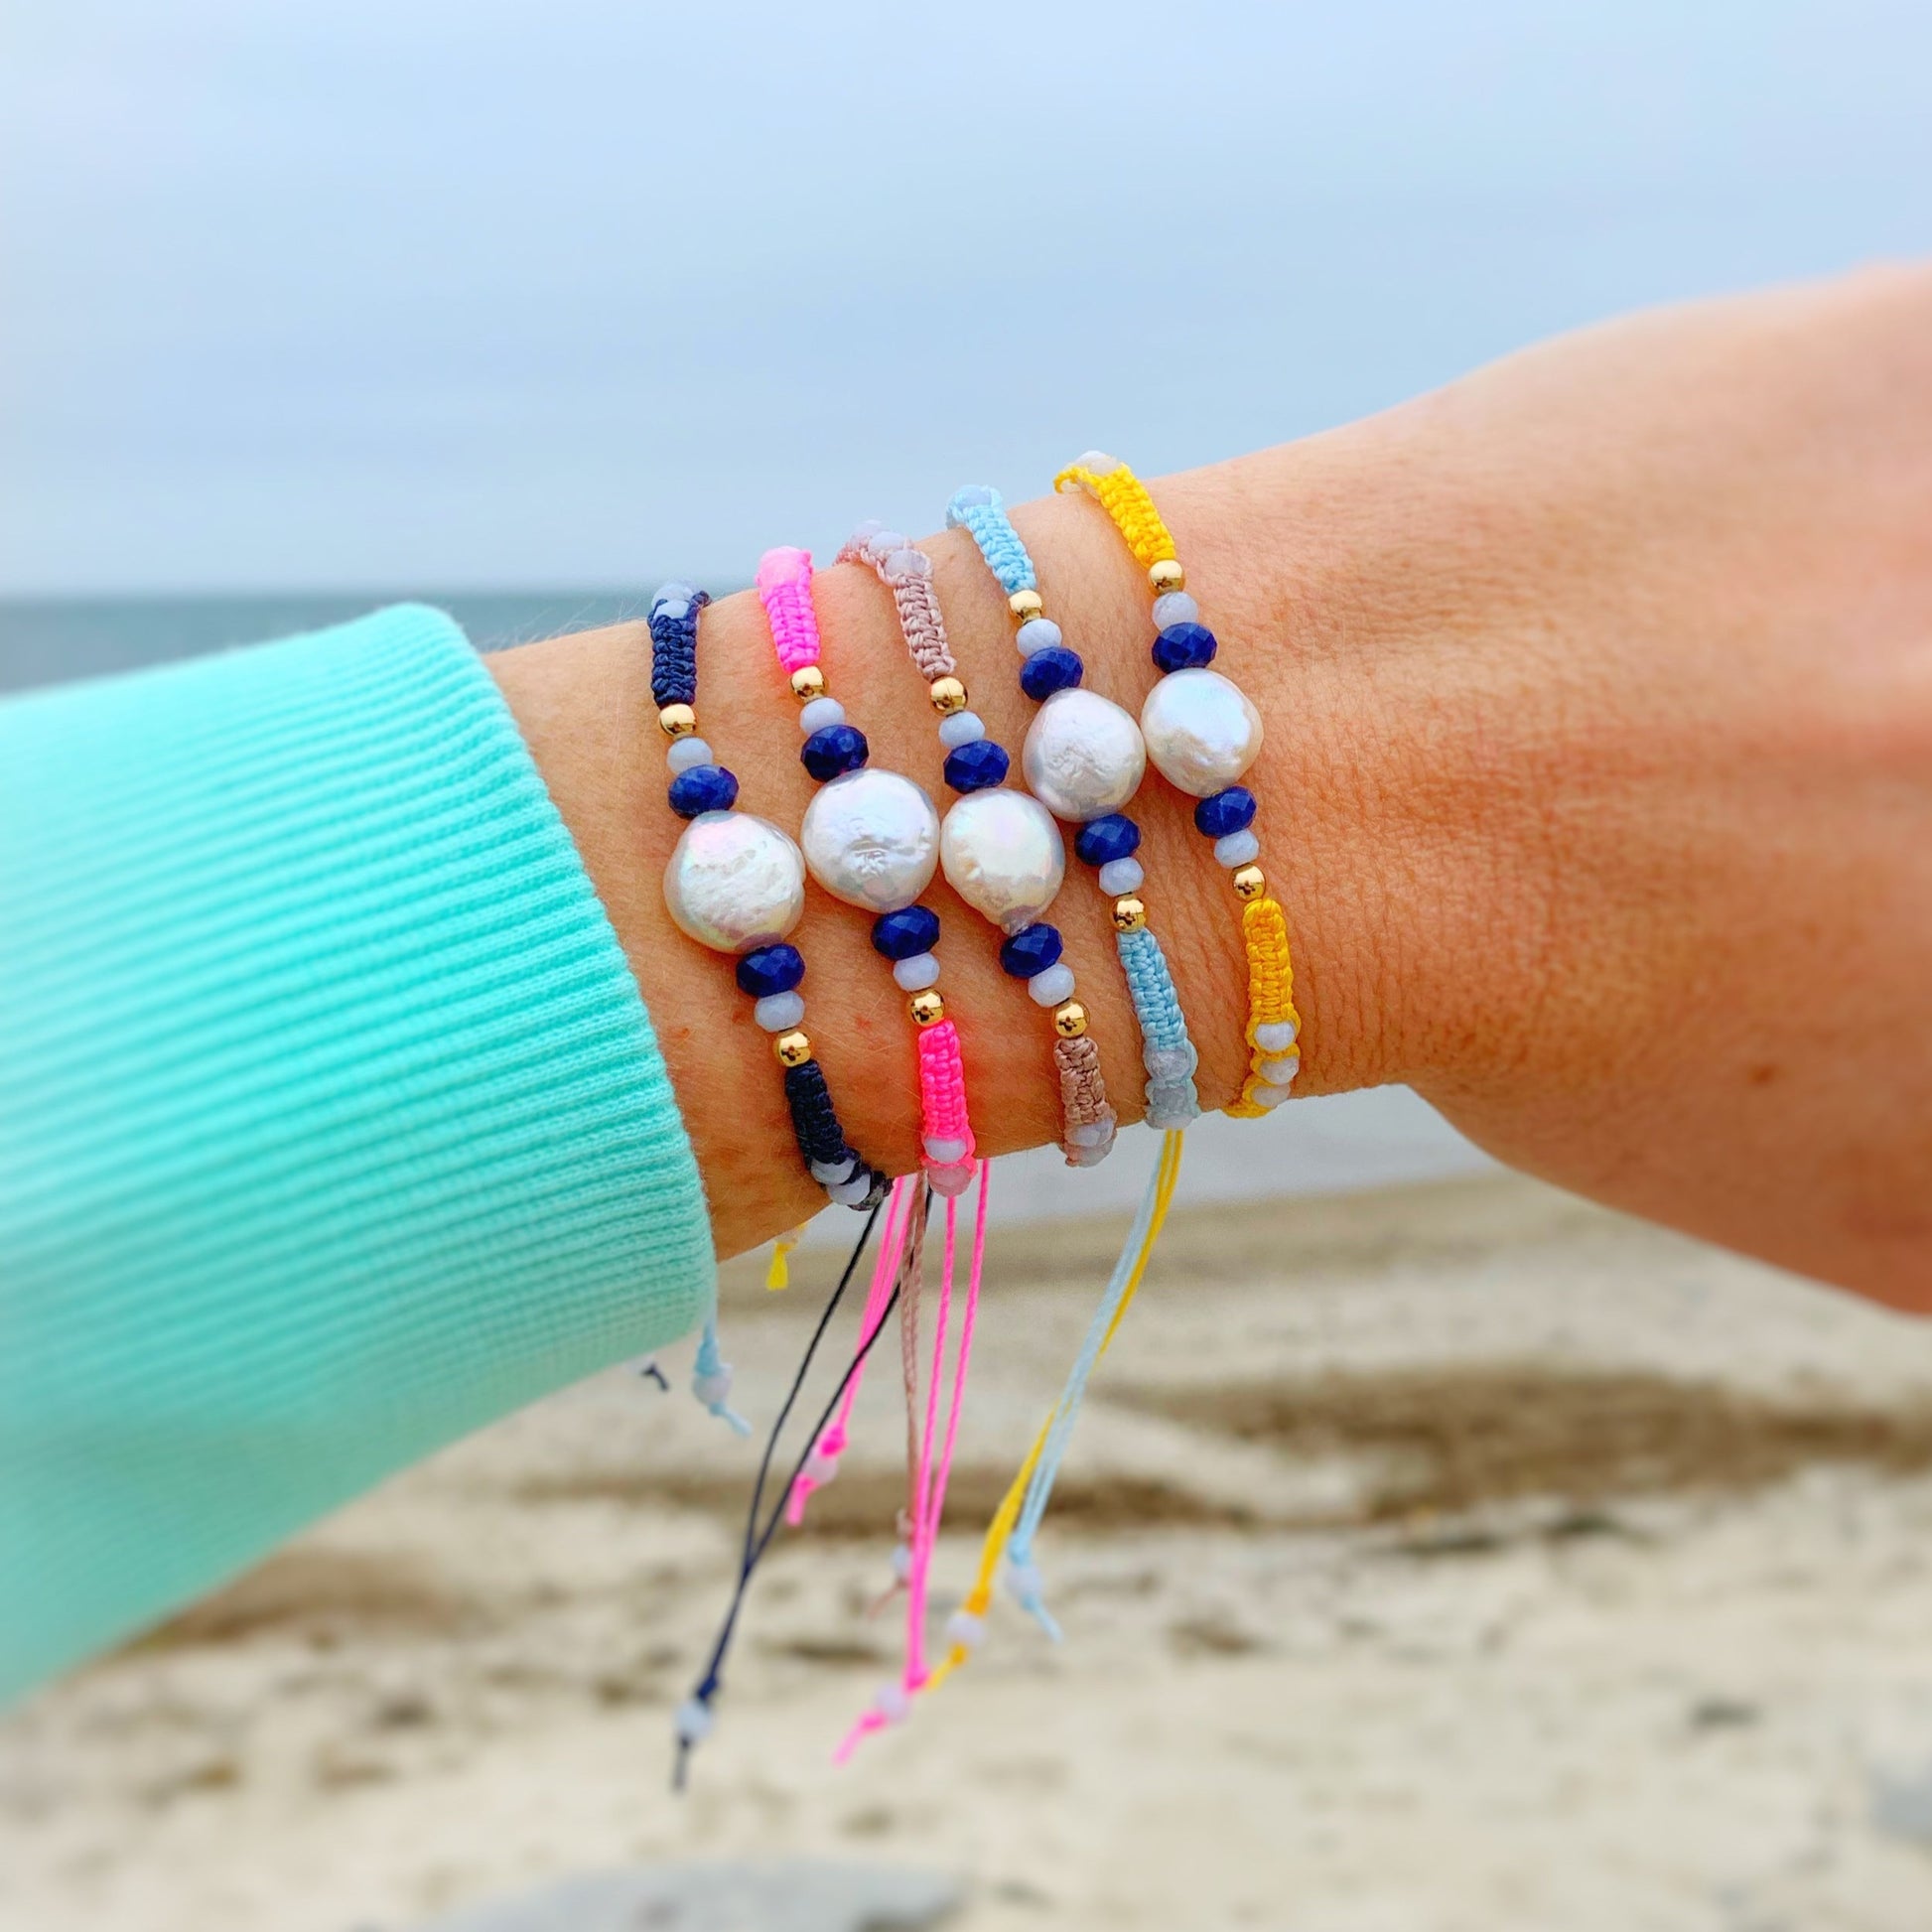 all 5 available colors of the bristol bracelets worn on a wrist in front of the ocean background